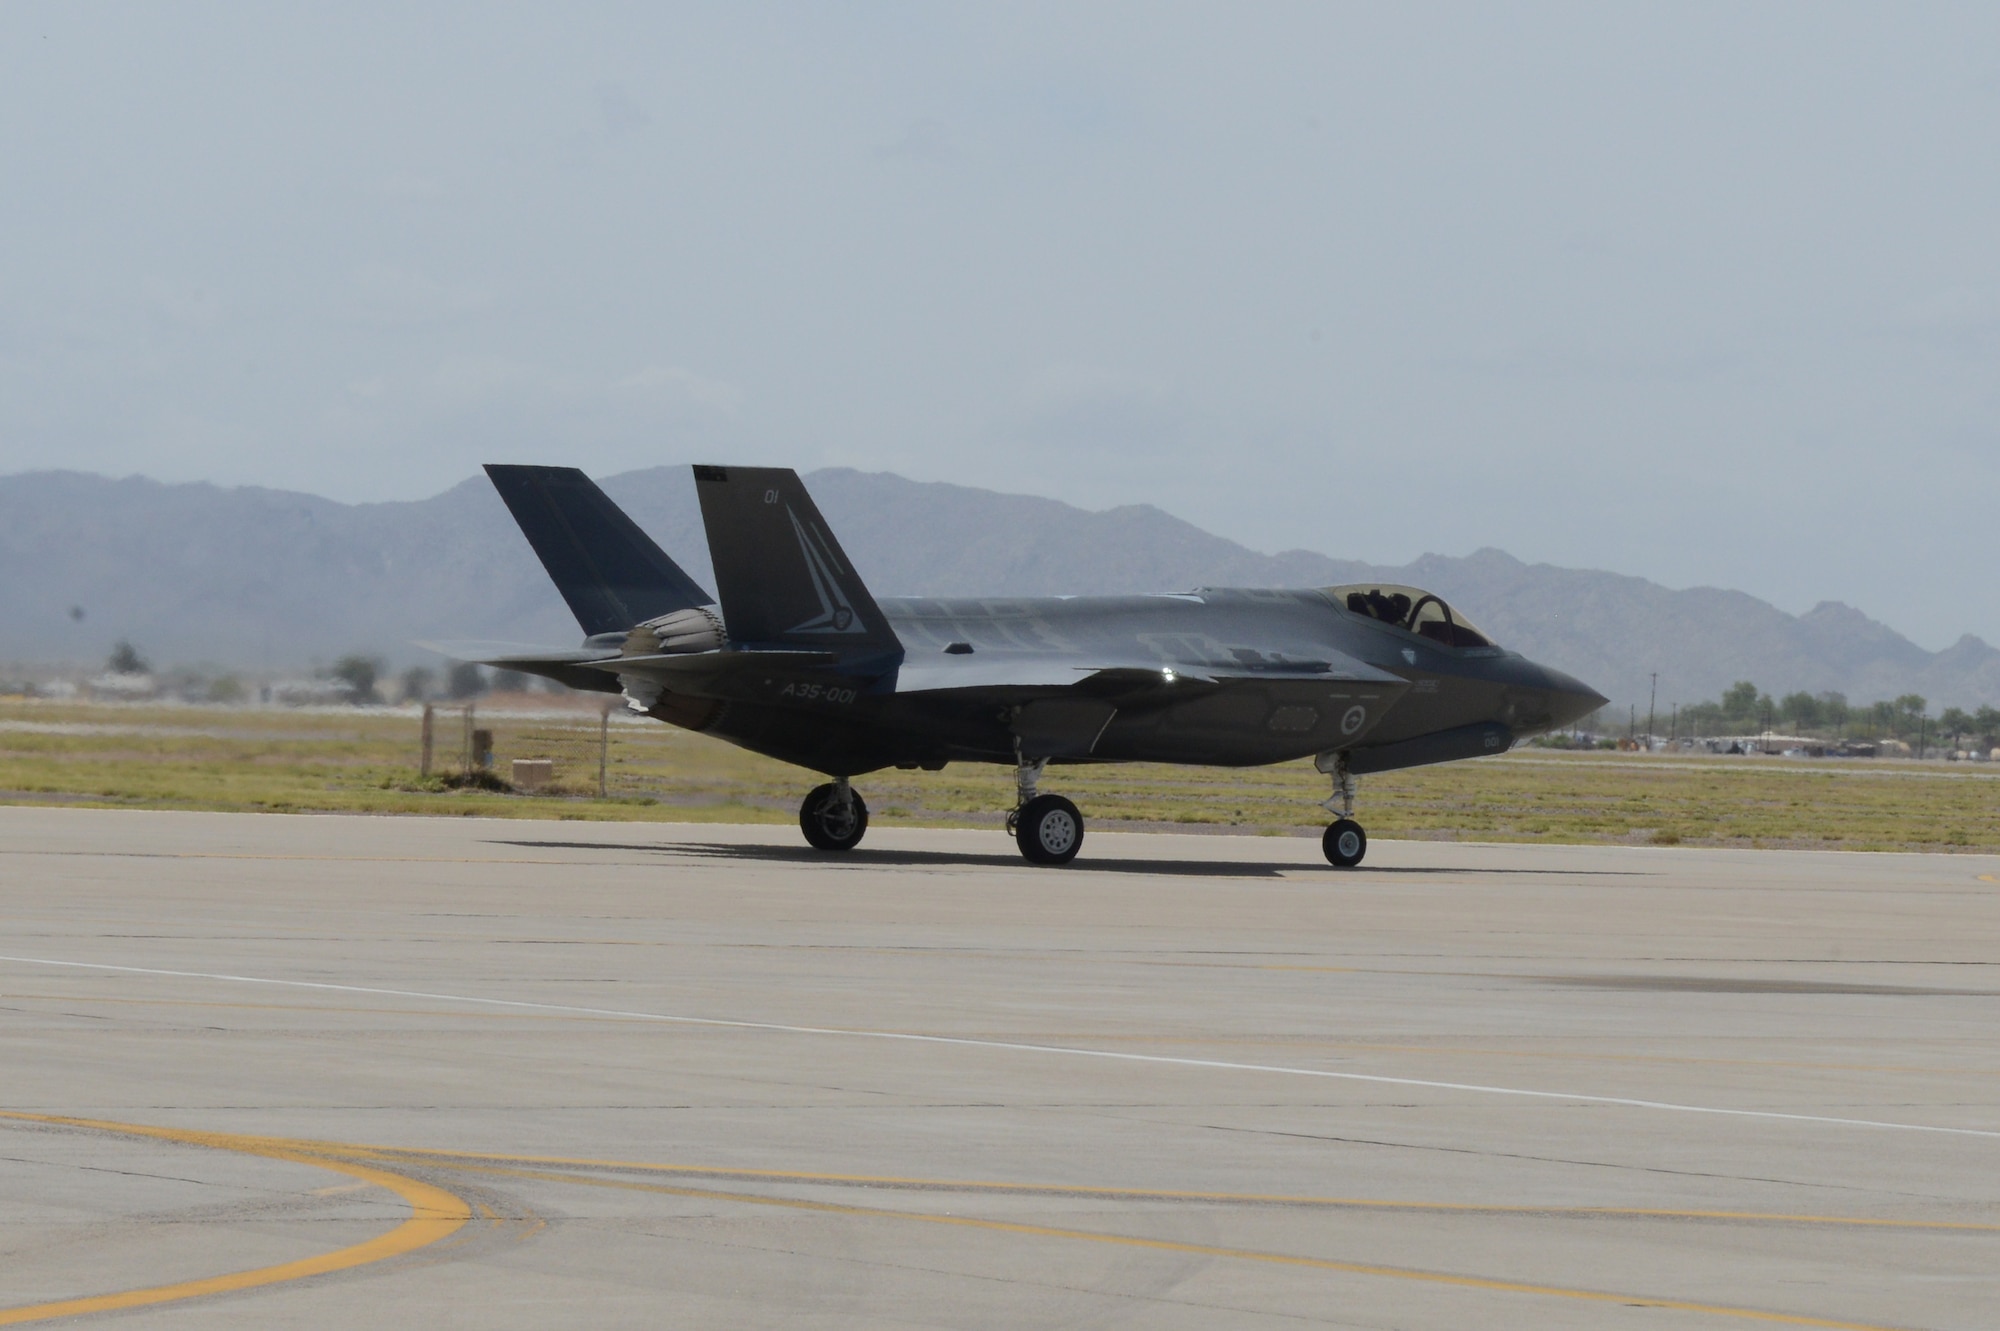 Royal Australian Air Force Maj. Andrew Jackson, 61st Fighter Squadron RAAF squadron leader, taxis out to the runway at Luke Air Force Base, Arizona, May 14, 2015. This flight marks the first F-35 sortie for the RAAF. (U.S. Air Force photo by Senior Airman James Hensley) 